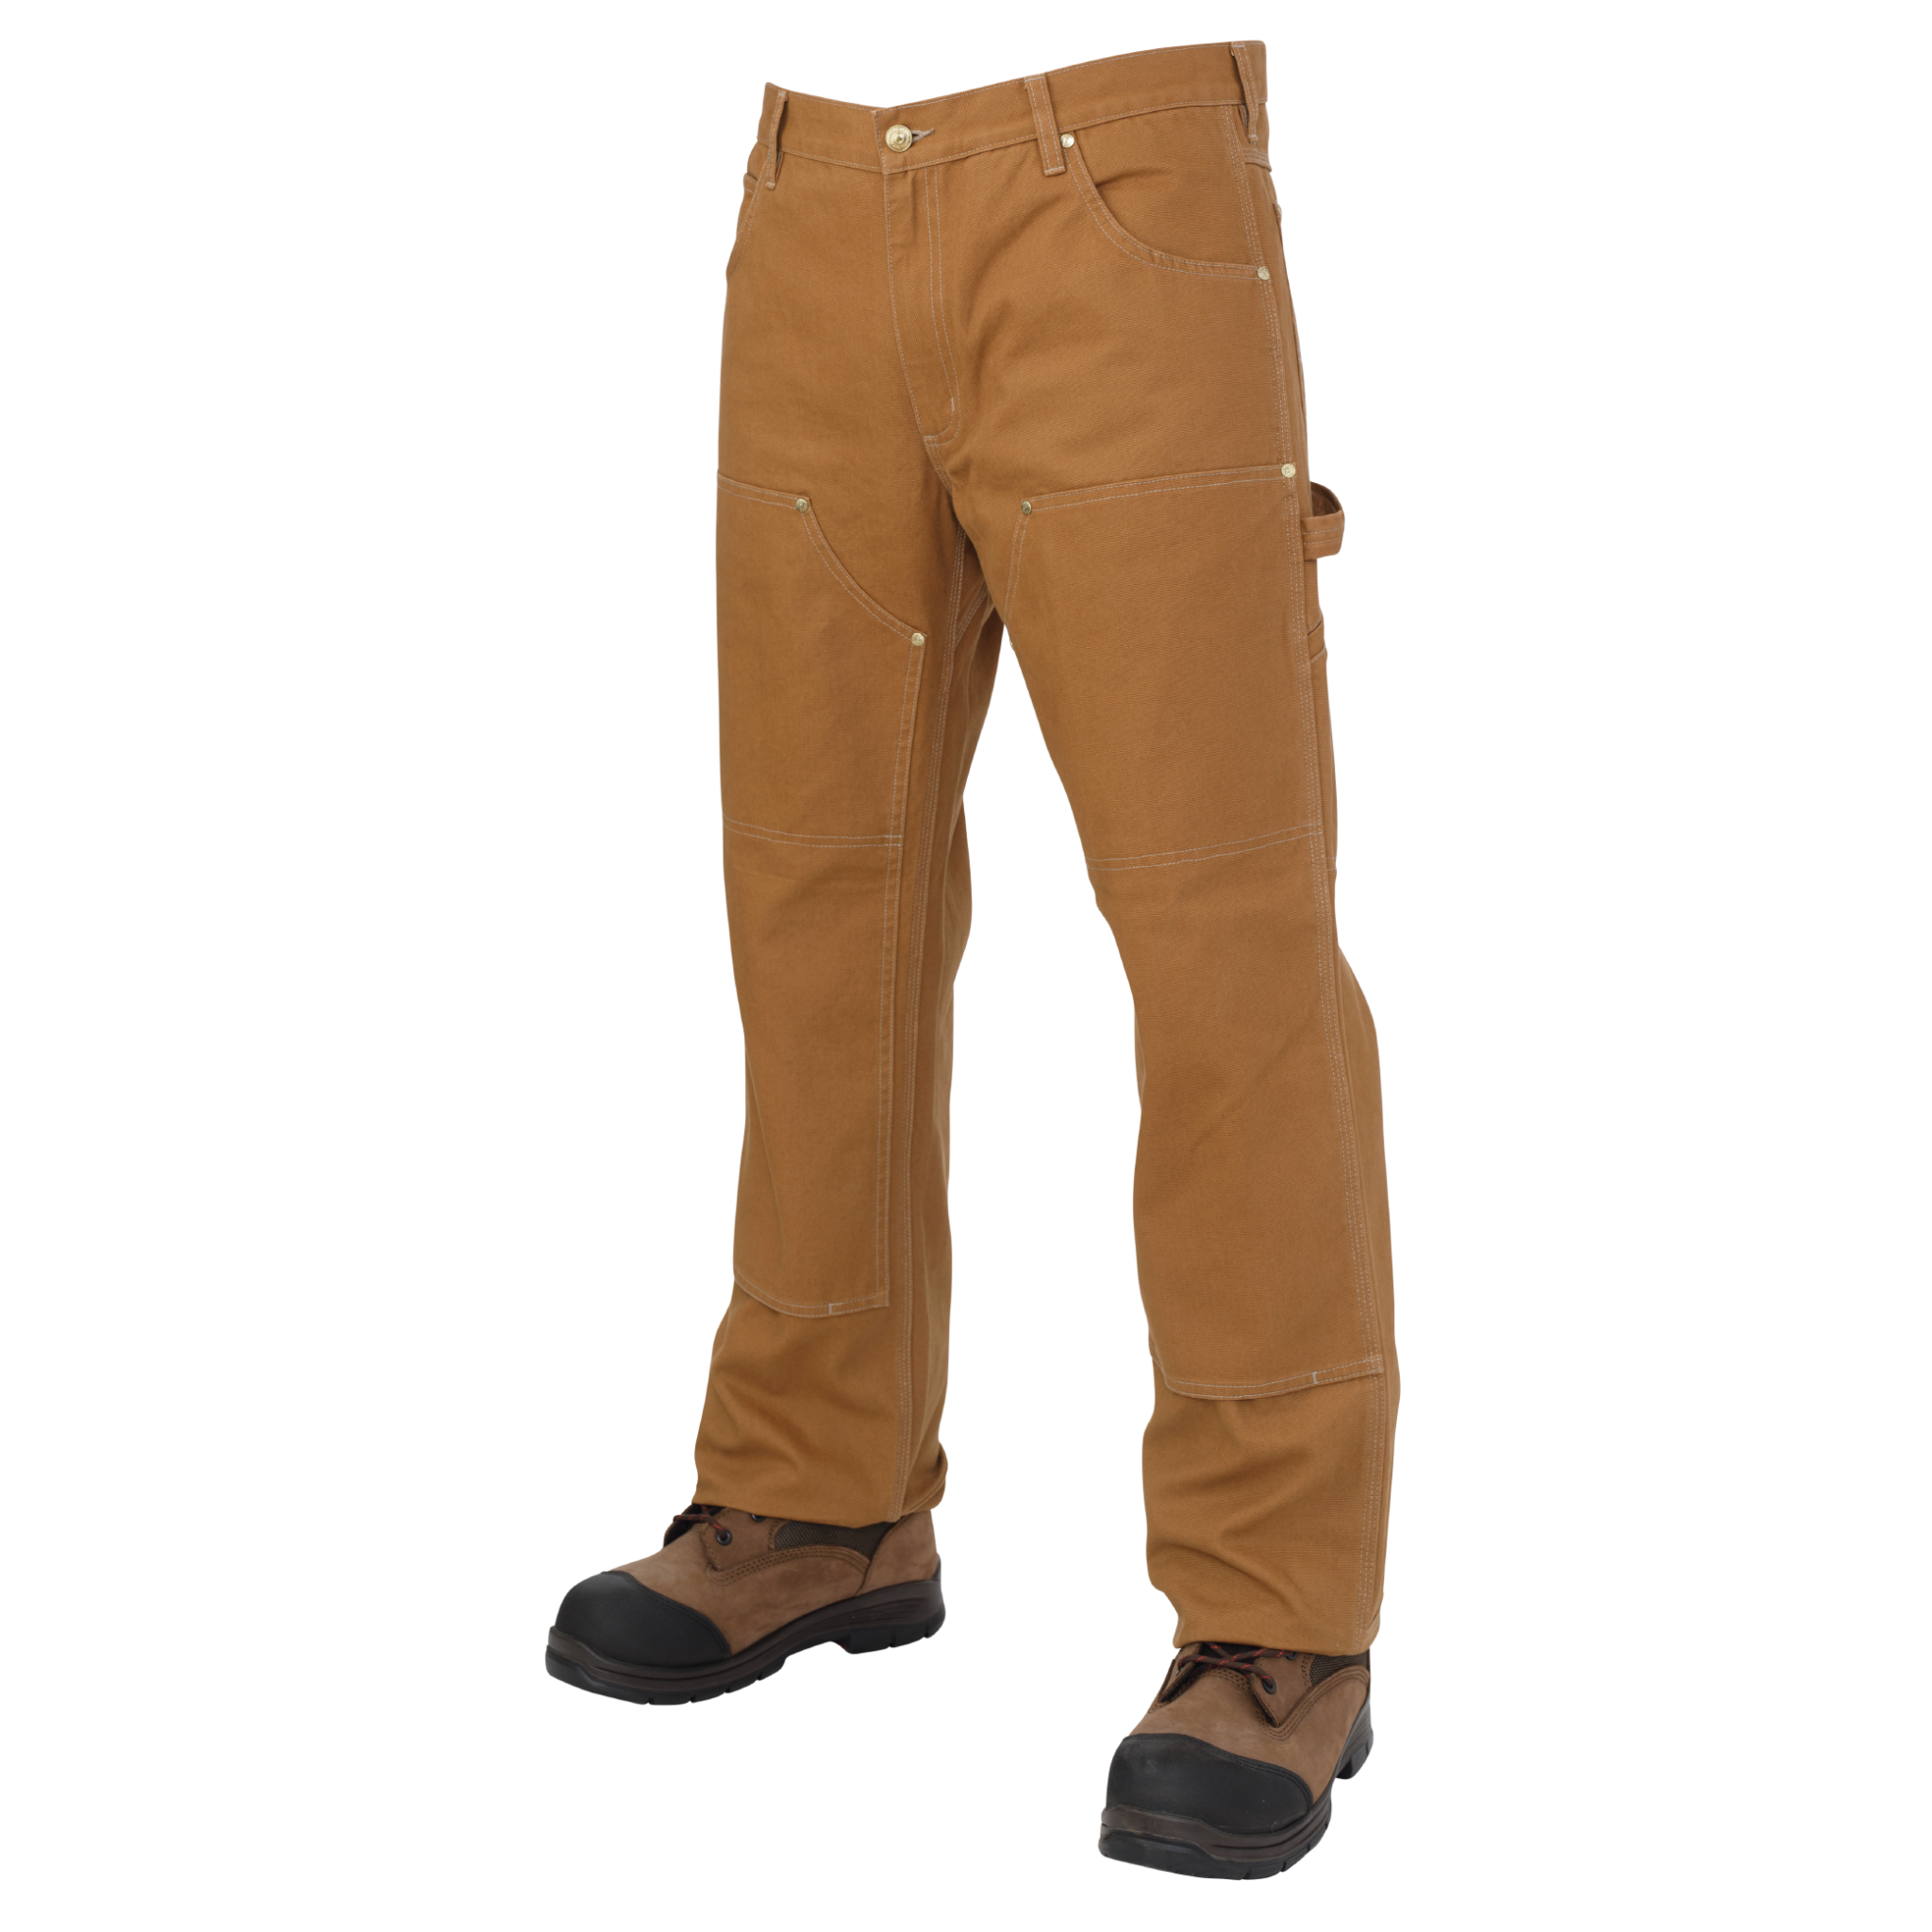 https://toughduck.com/wp-content/uploads/2021/07/WP03-PANT-FRONT-BROWN_resized-01.png